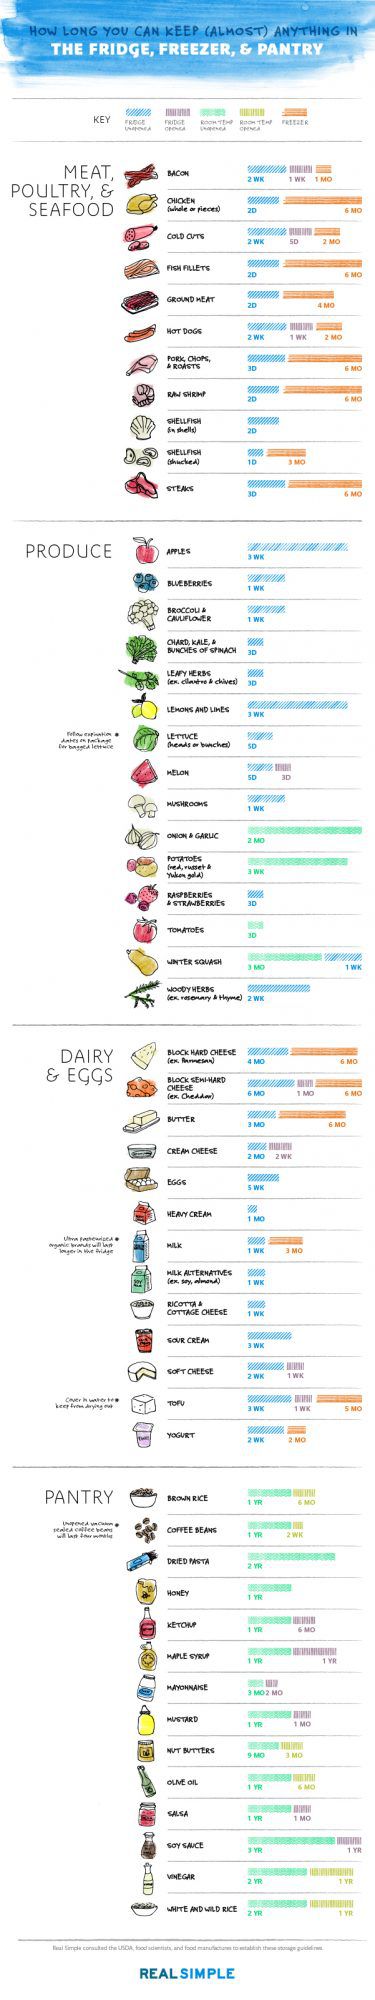 How Long Does Food Last In the Fridge And Freezer? Infographic picture with timelines for different foods